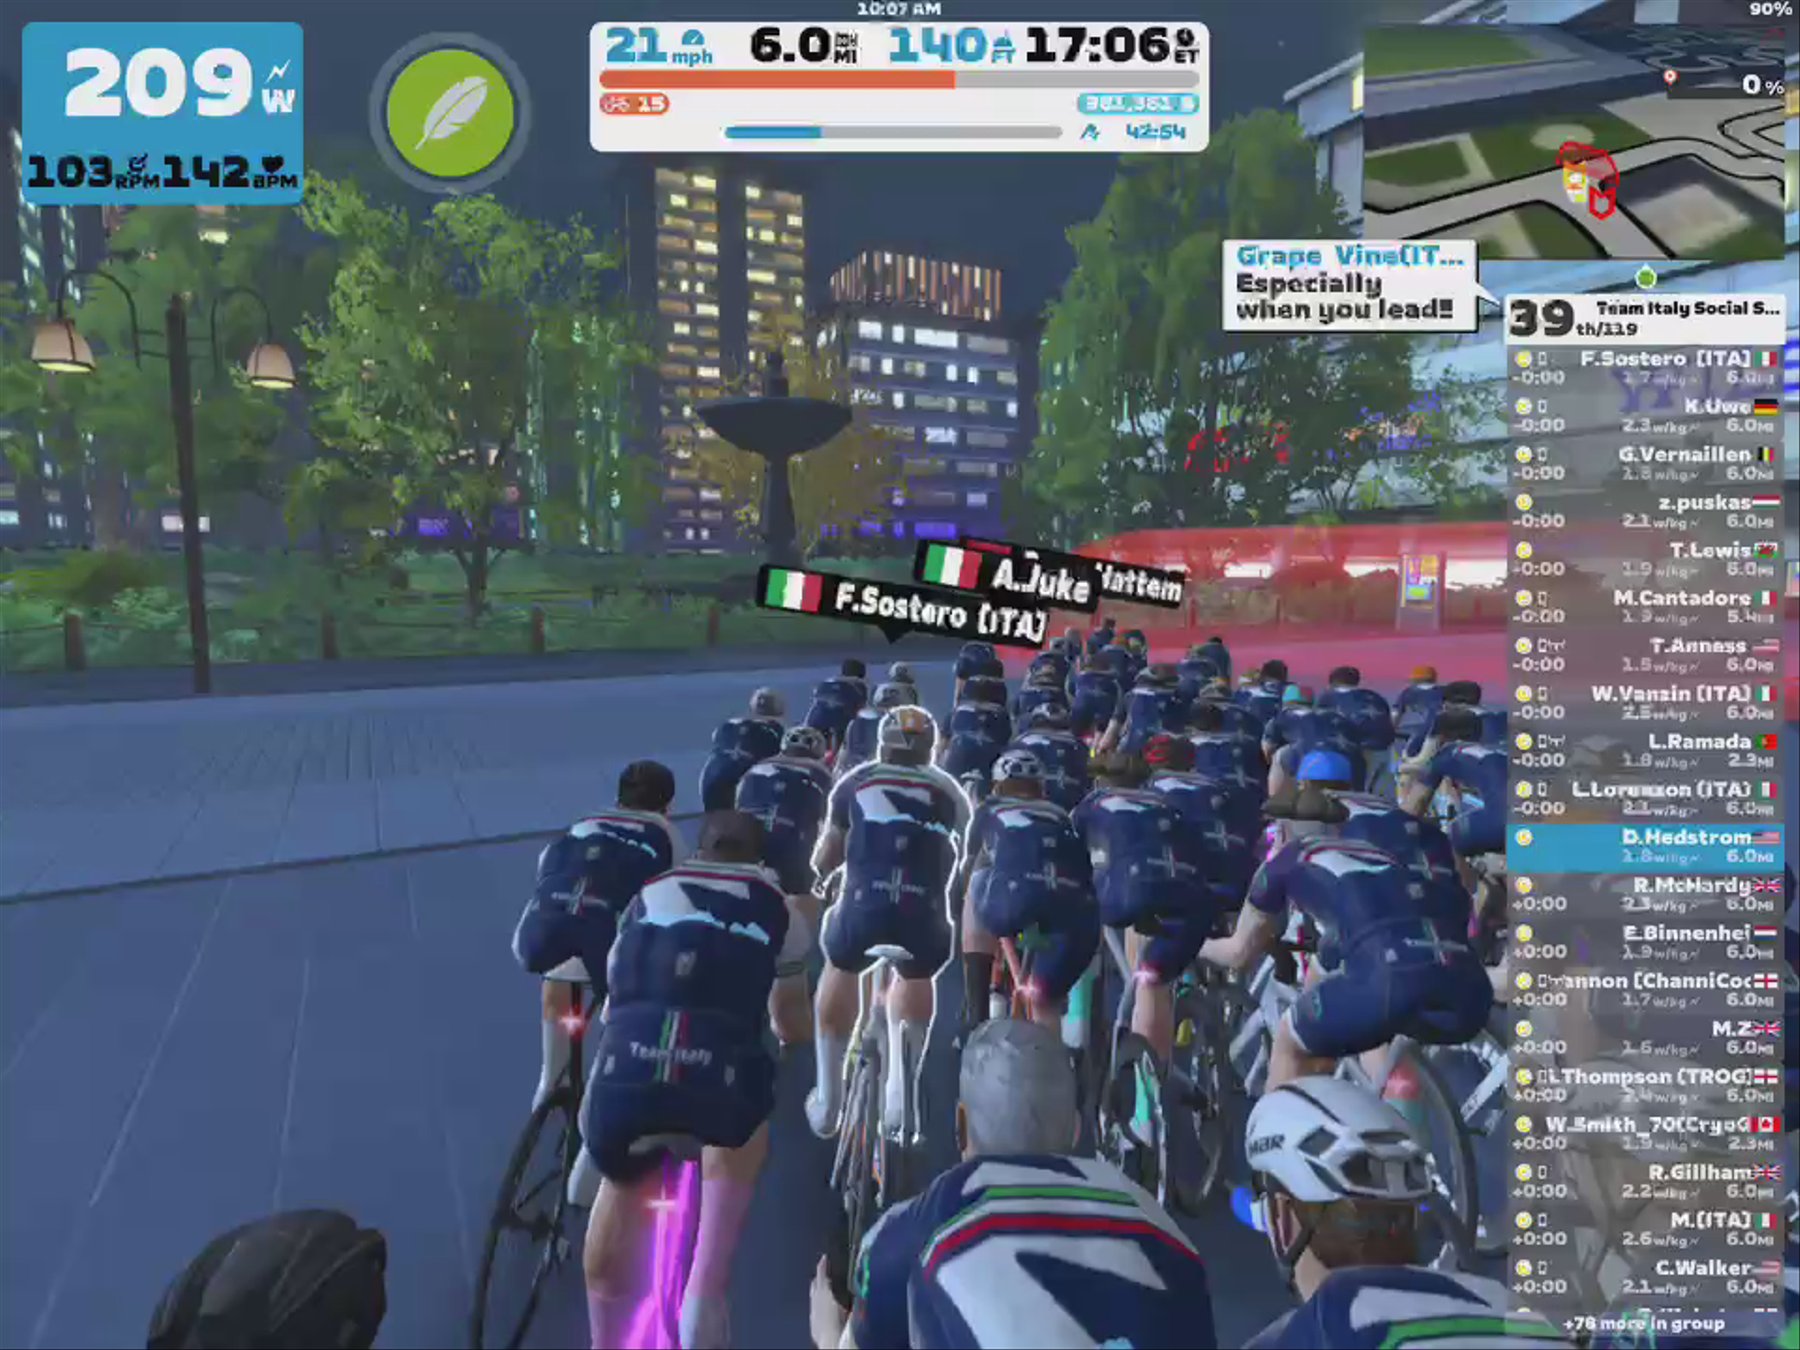 Zwift - Group Ride: Team Italy Social SUB2 Ride (D) on Sleepless City in Makuri Islands